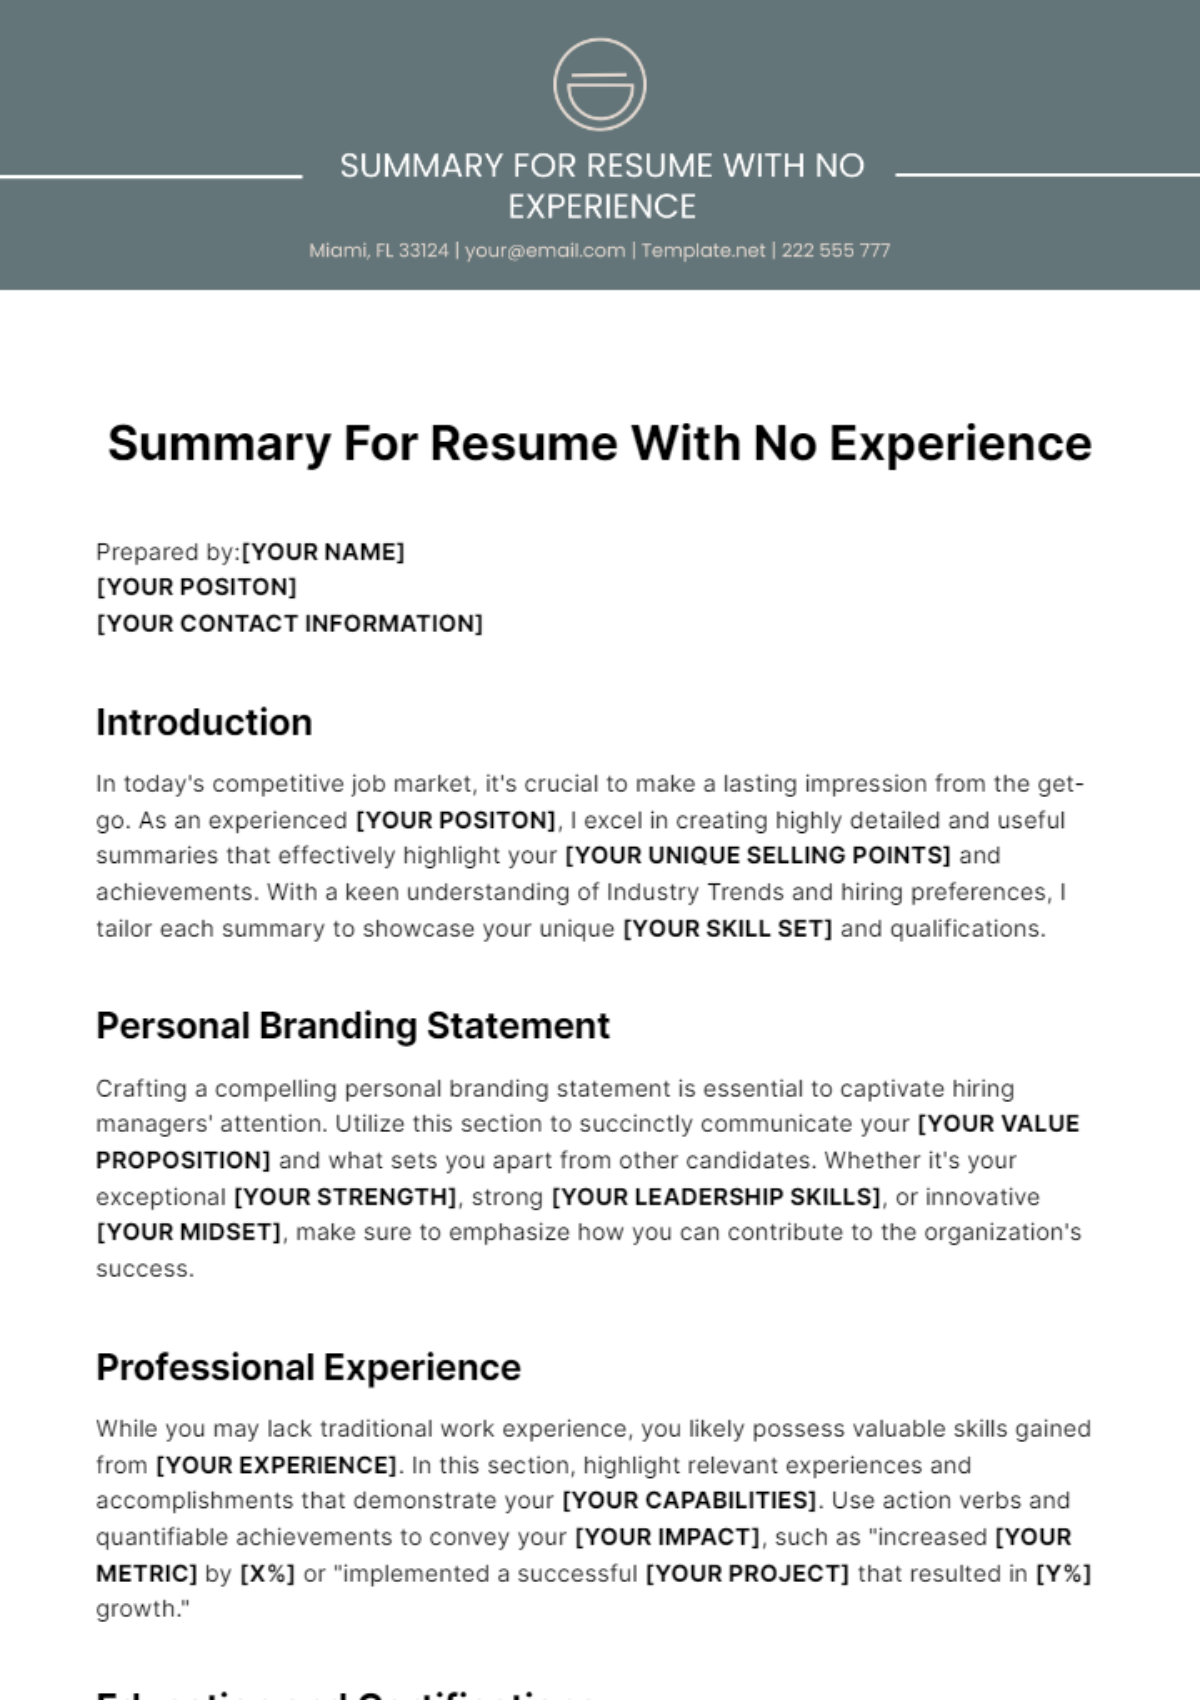 Summary For Resume With No Experience Template